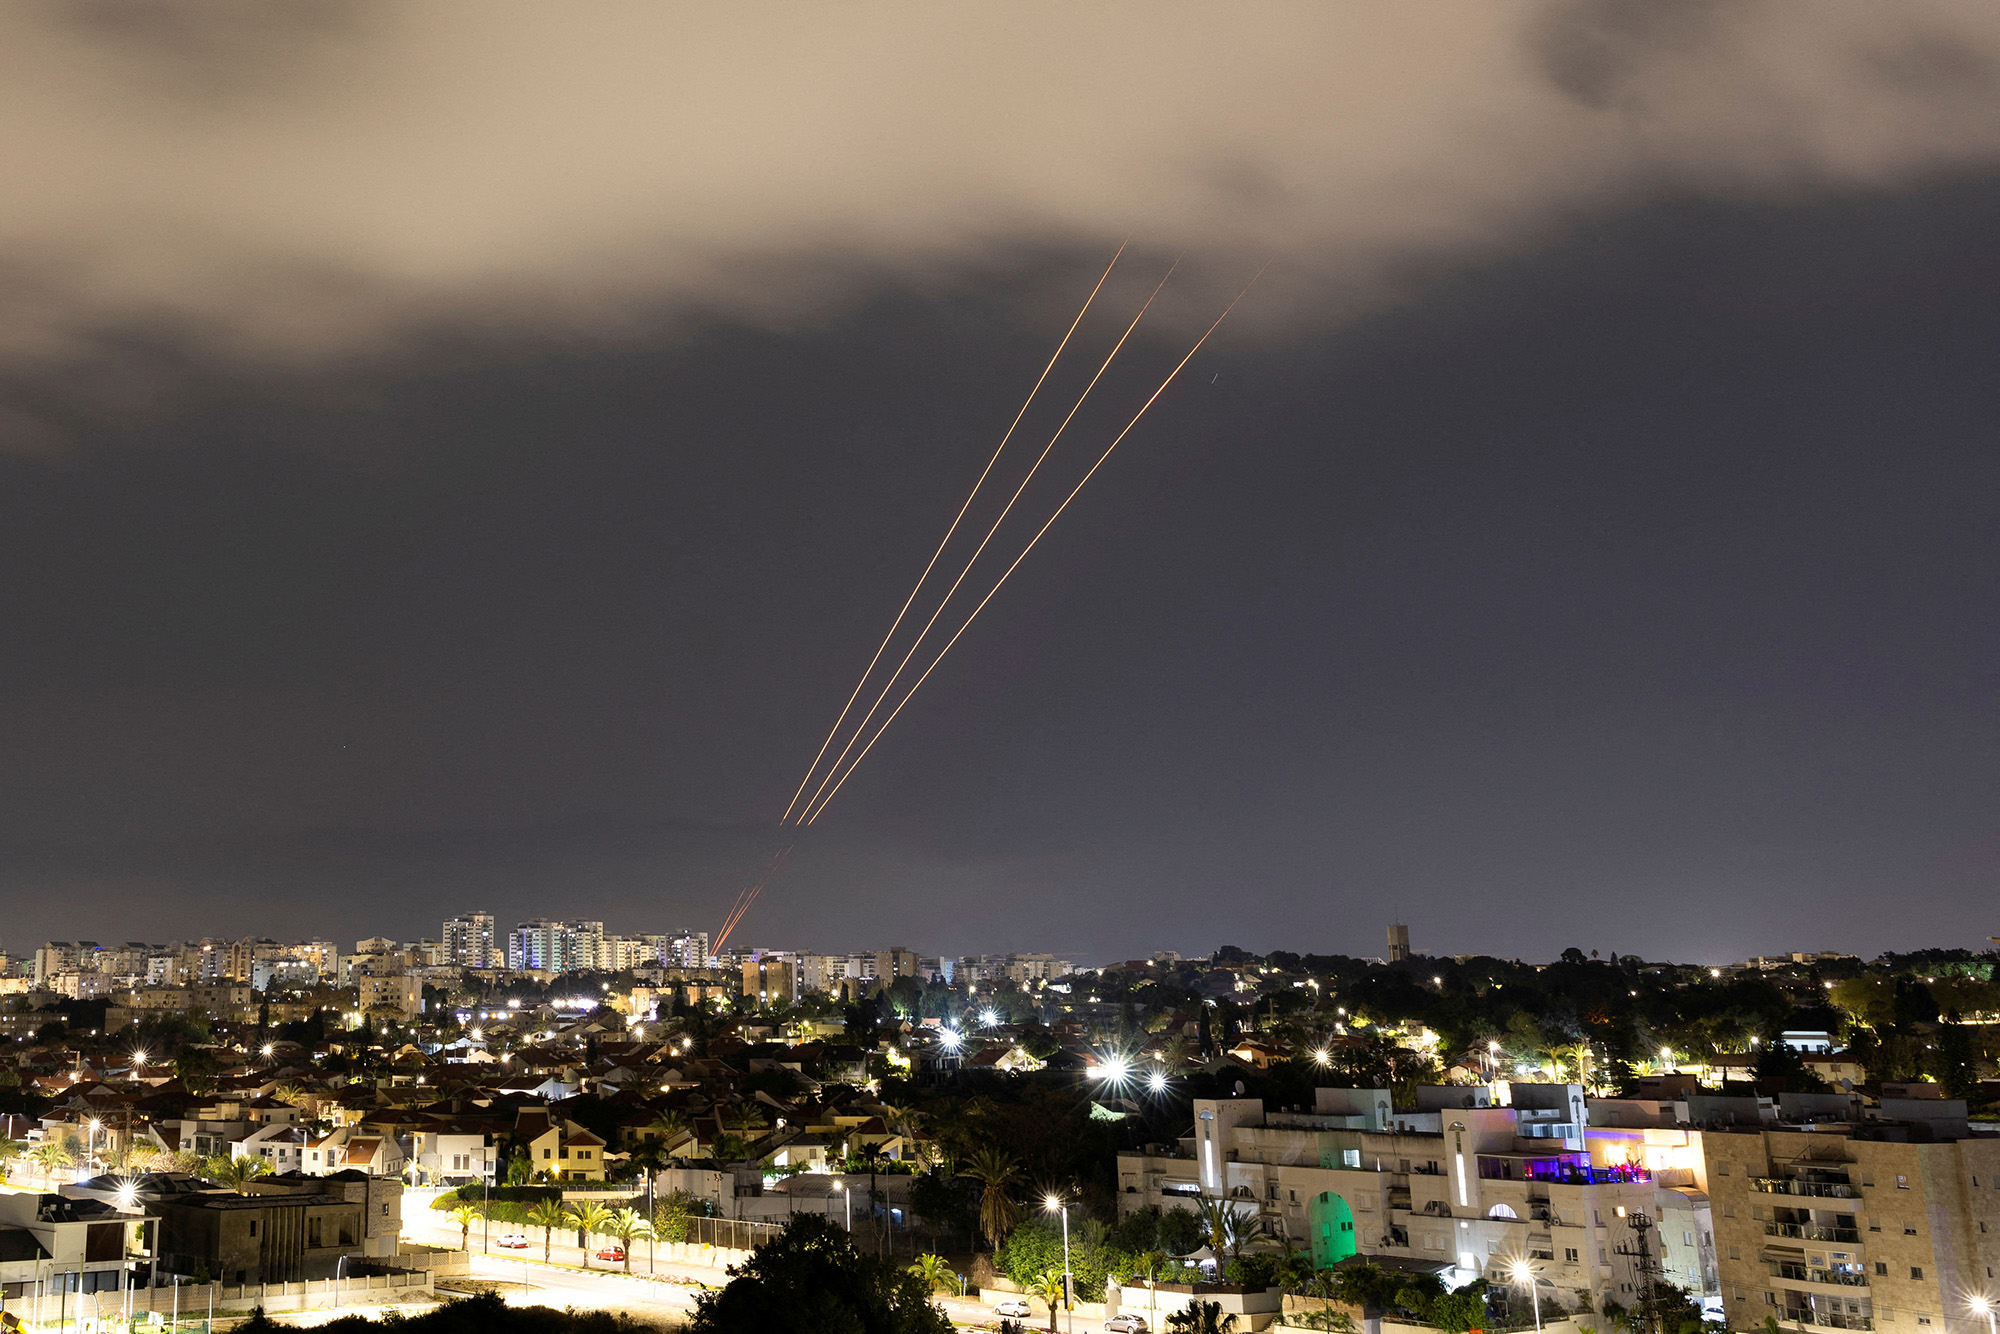 An anti-missile system operates after Iran launched drones and missiles towards Israel, as seen from Ashkelon, Israel on April 14.